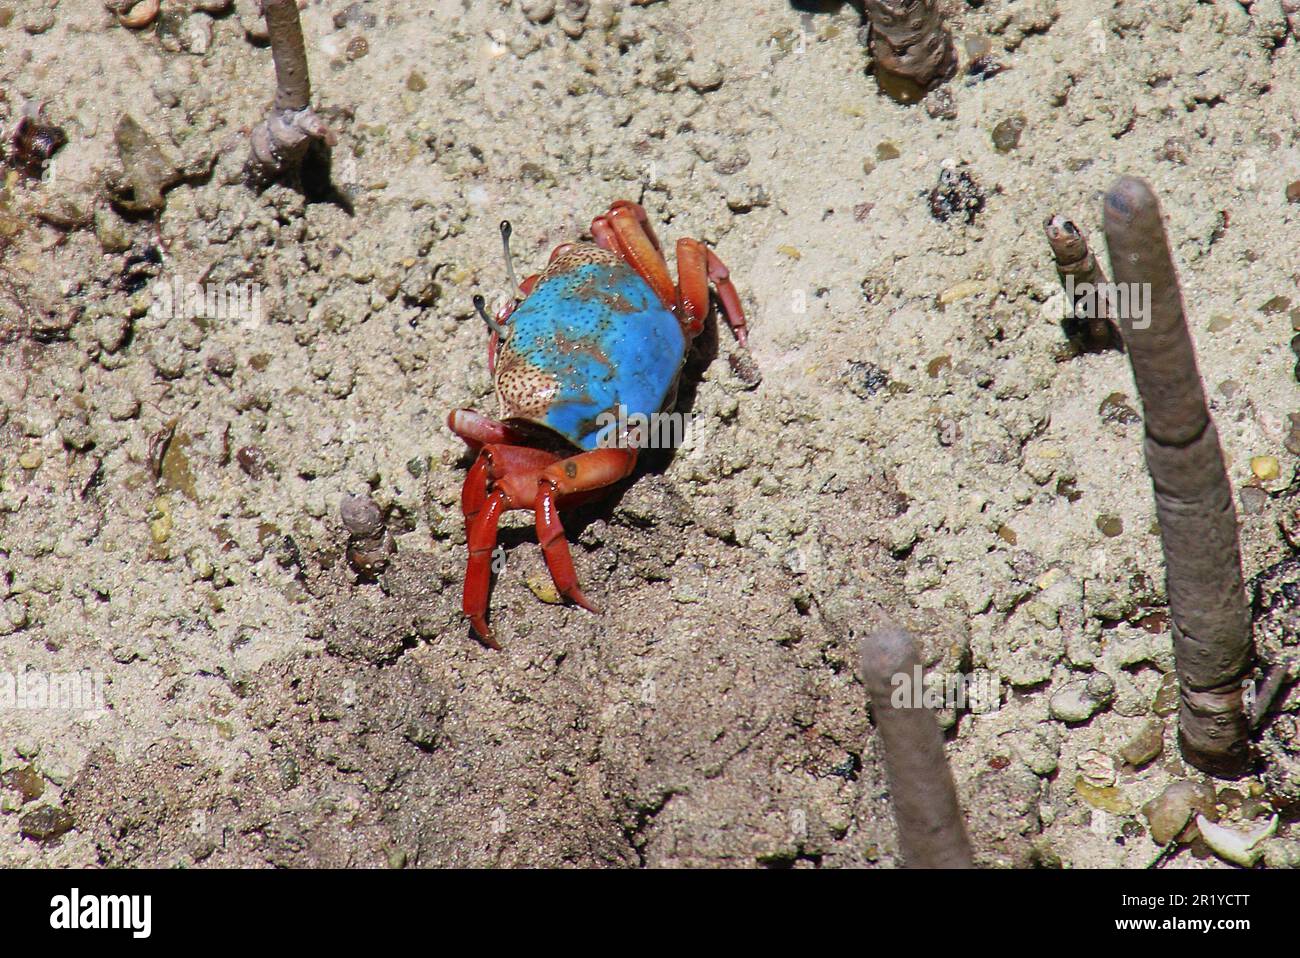 Fiddler crab (Uca tetragonon) without fully grown claws Photographed in a Mangrove swamp, Seychelles Curieuse Island in April Stock Photo